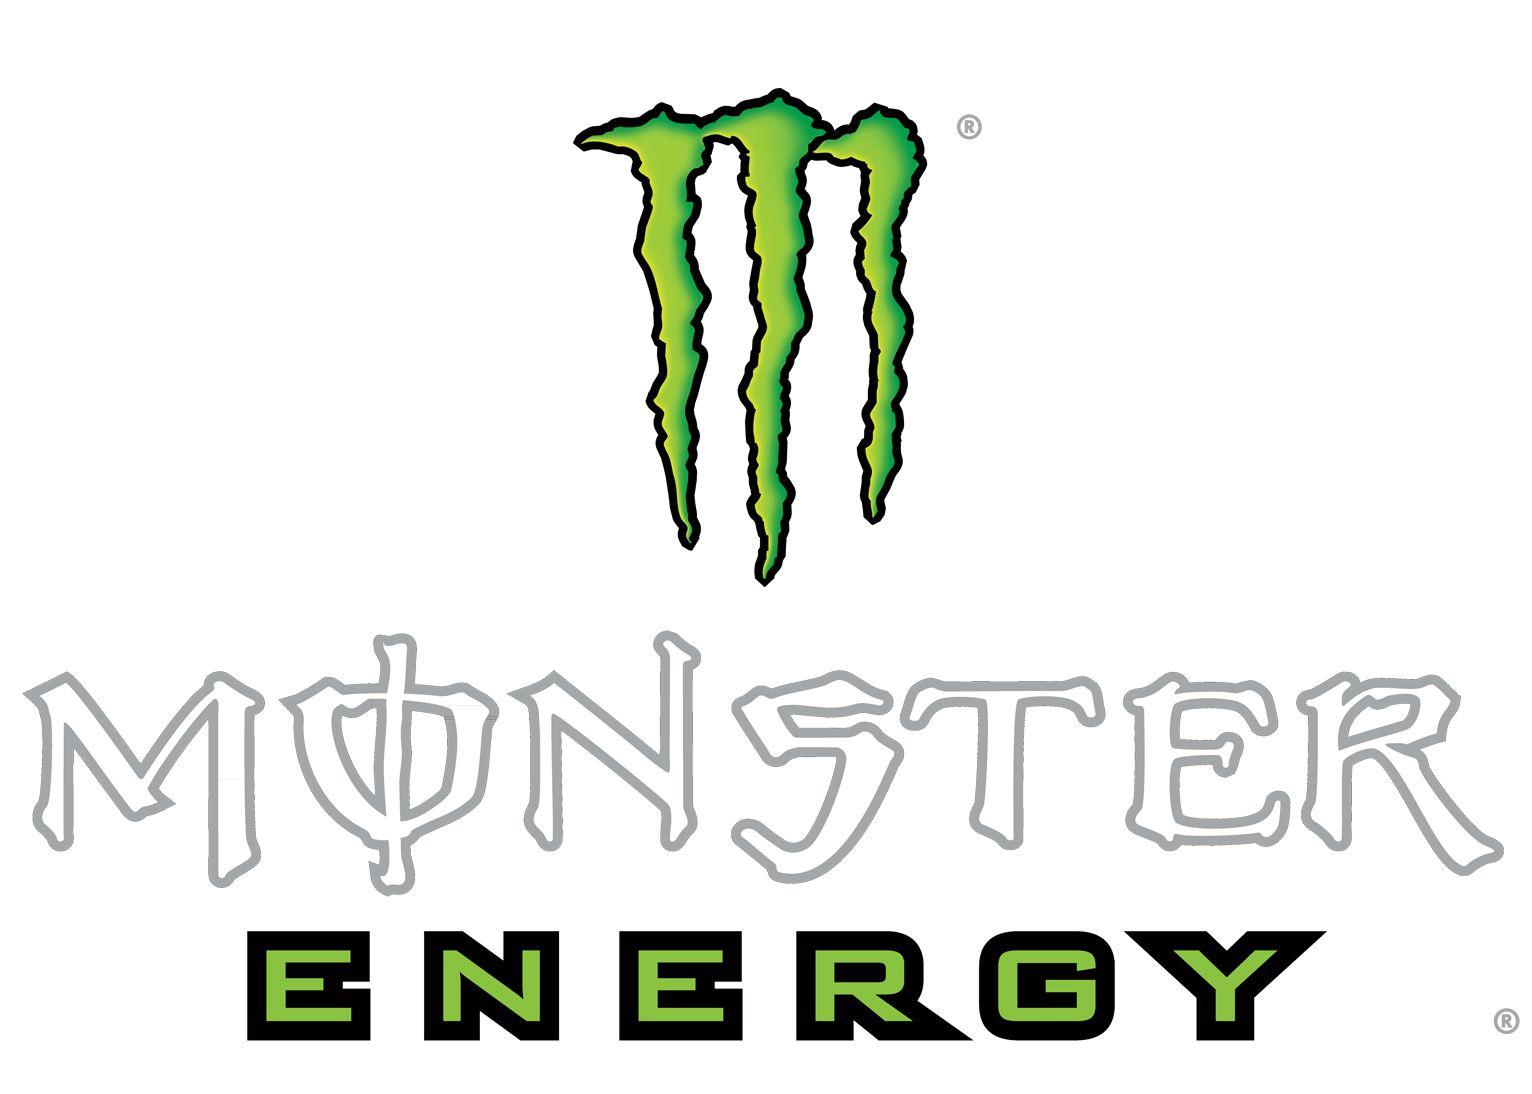 Hebrew Company Logo - Monster Energy Logo, Monster Energy Symbol, Meaning, History and ...